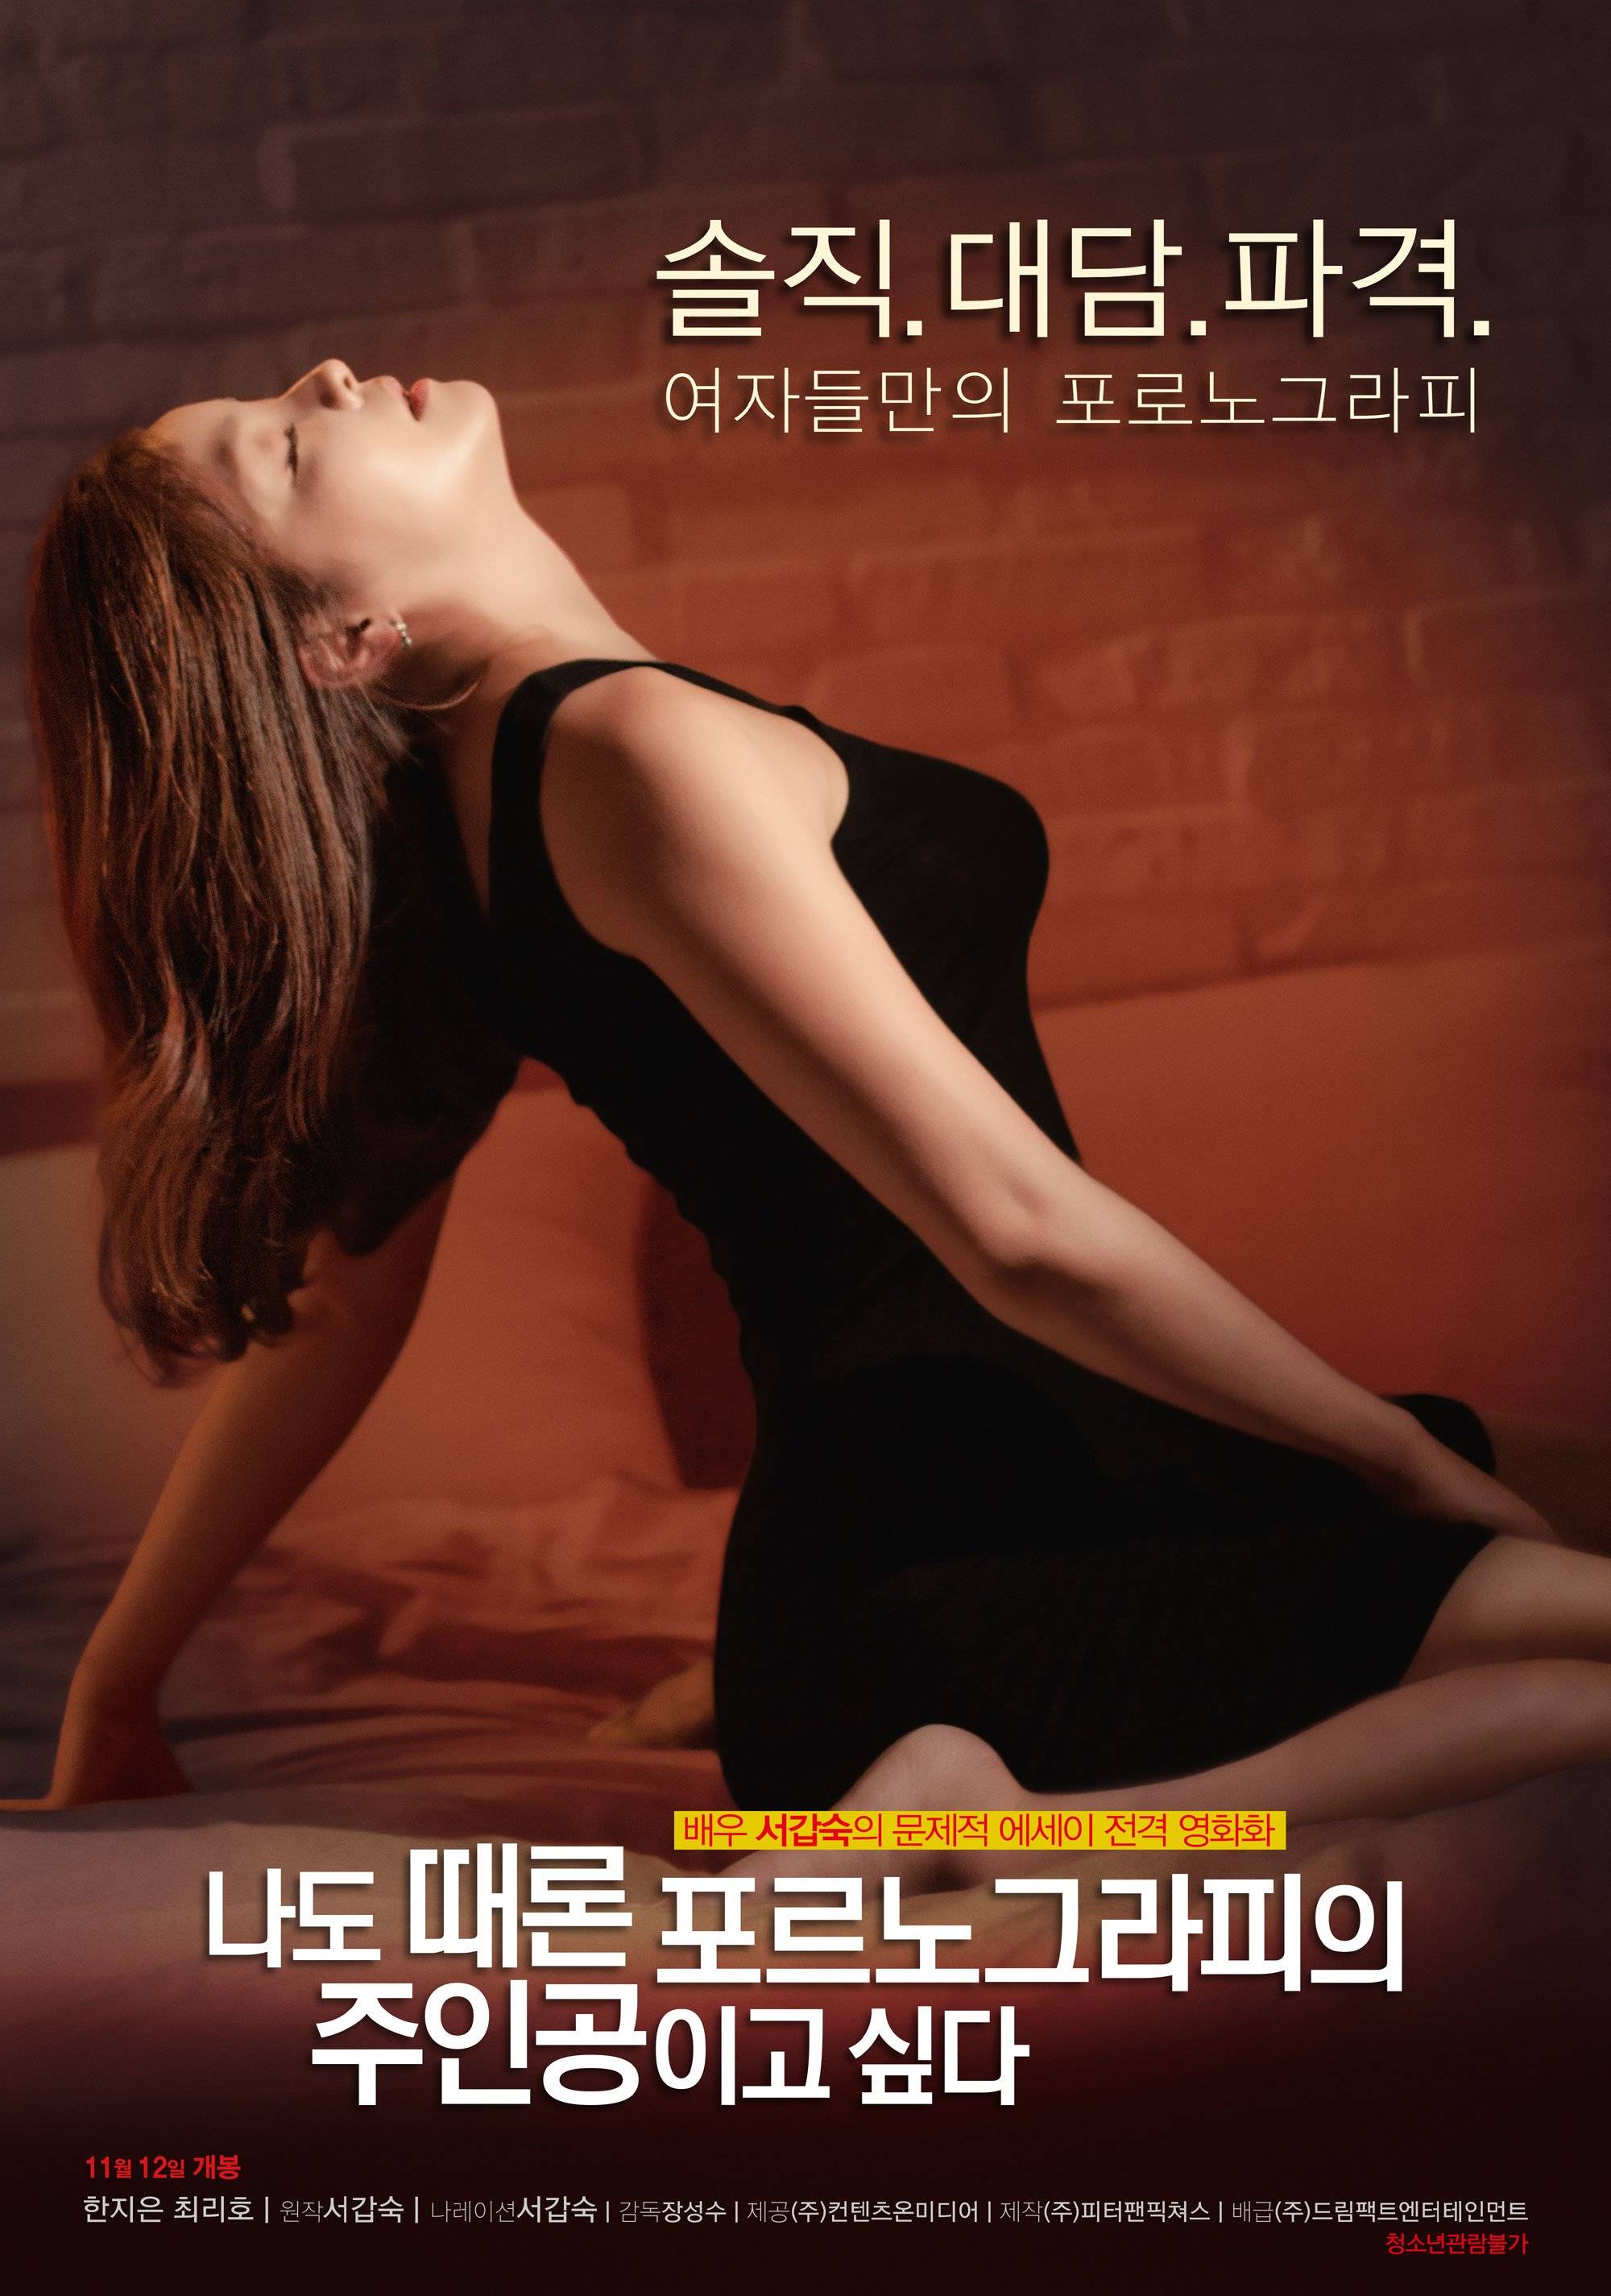 Newsexfilm - Photos] Added new poster and stills for the upcoming Korean movie ...